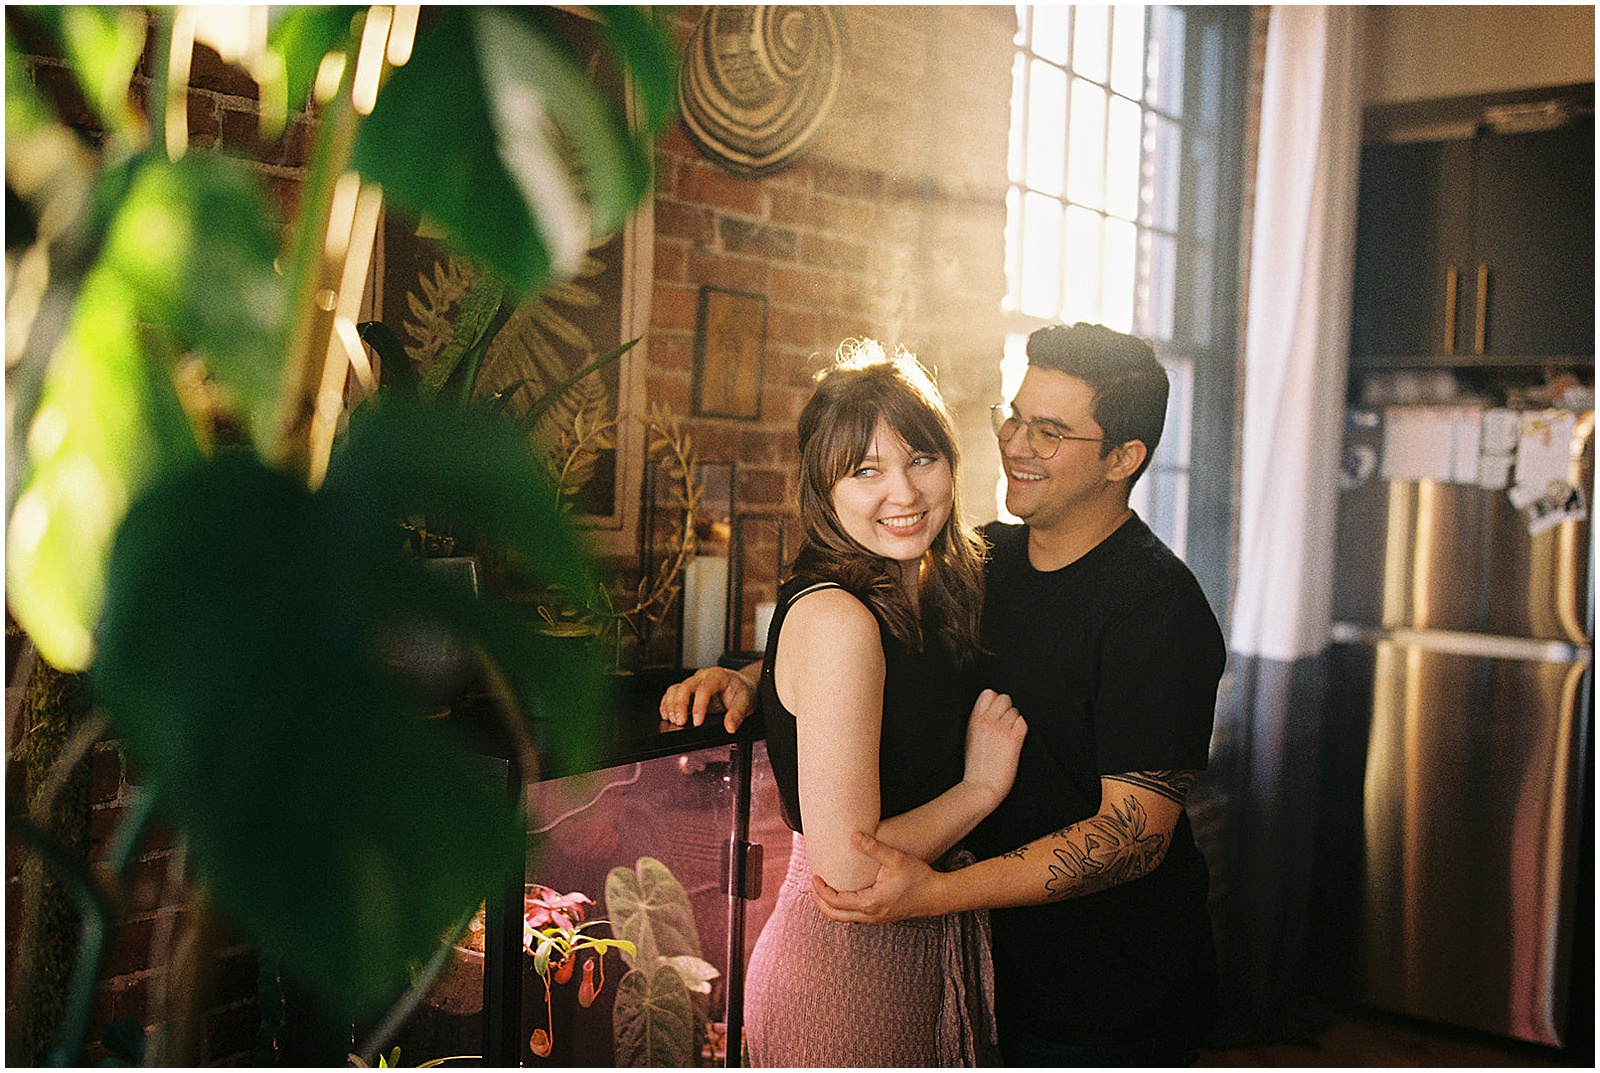 A woman leans on her husband and laughs in a sunny living room.